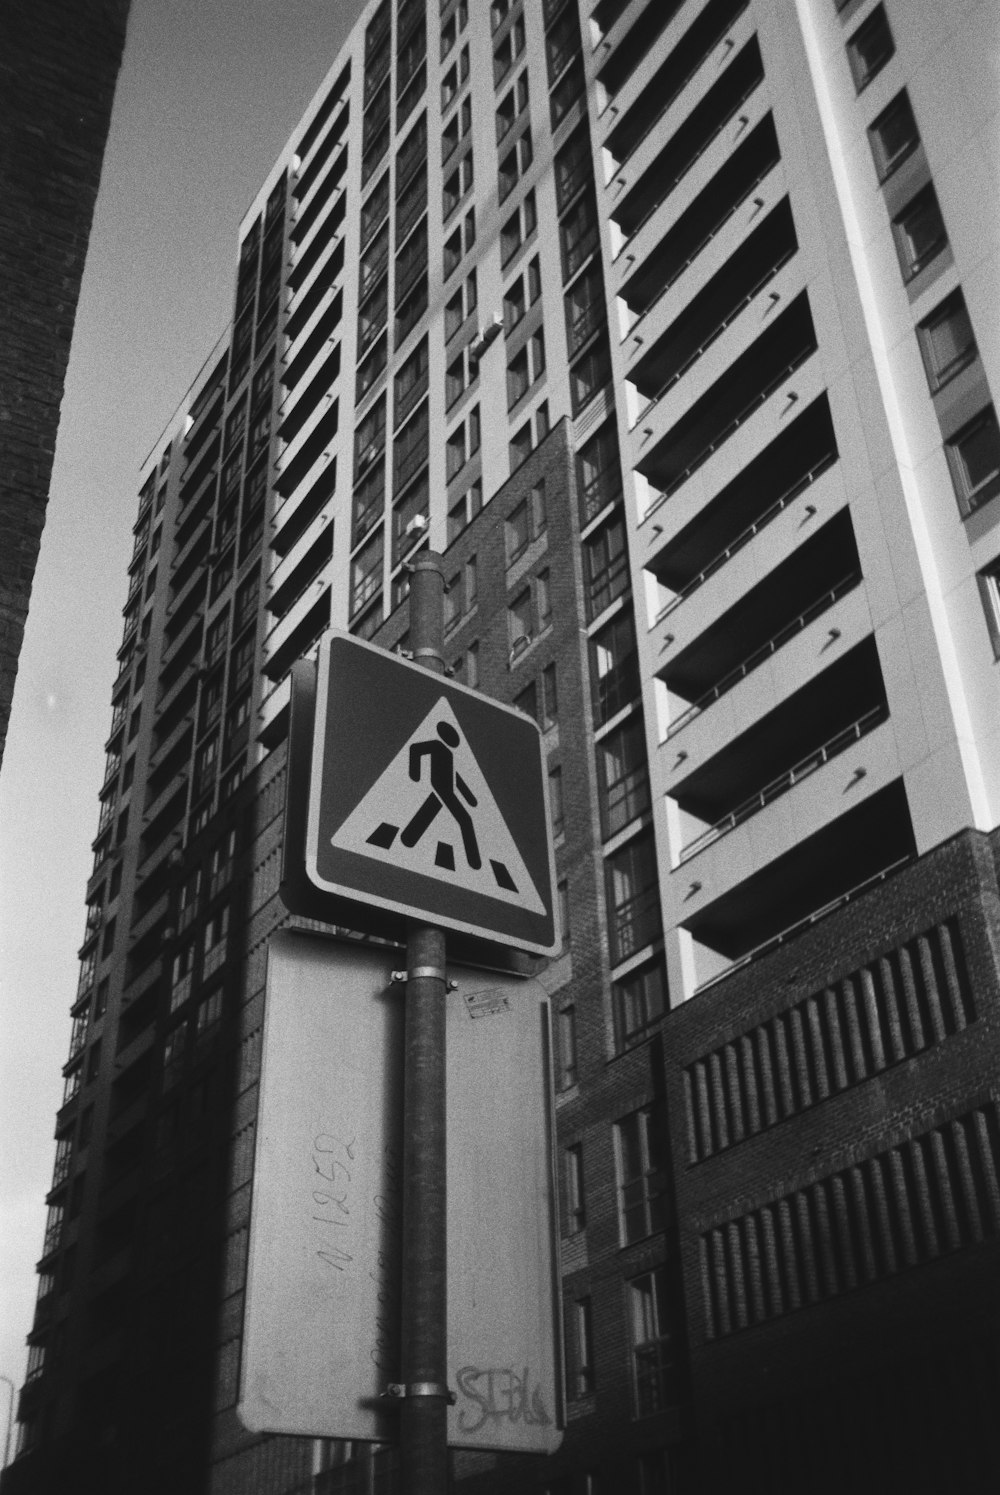 a street sign in front of a tall building